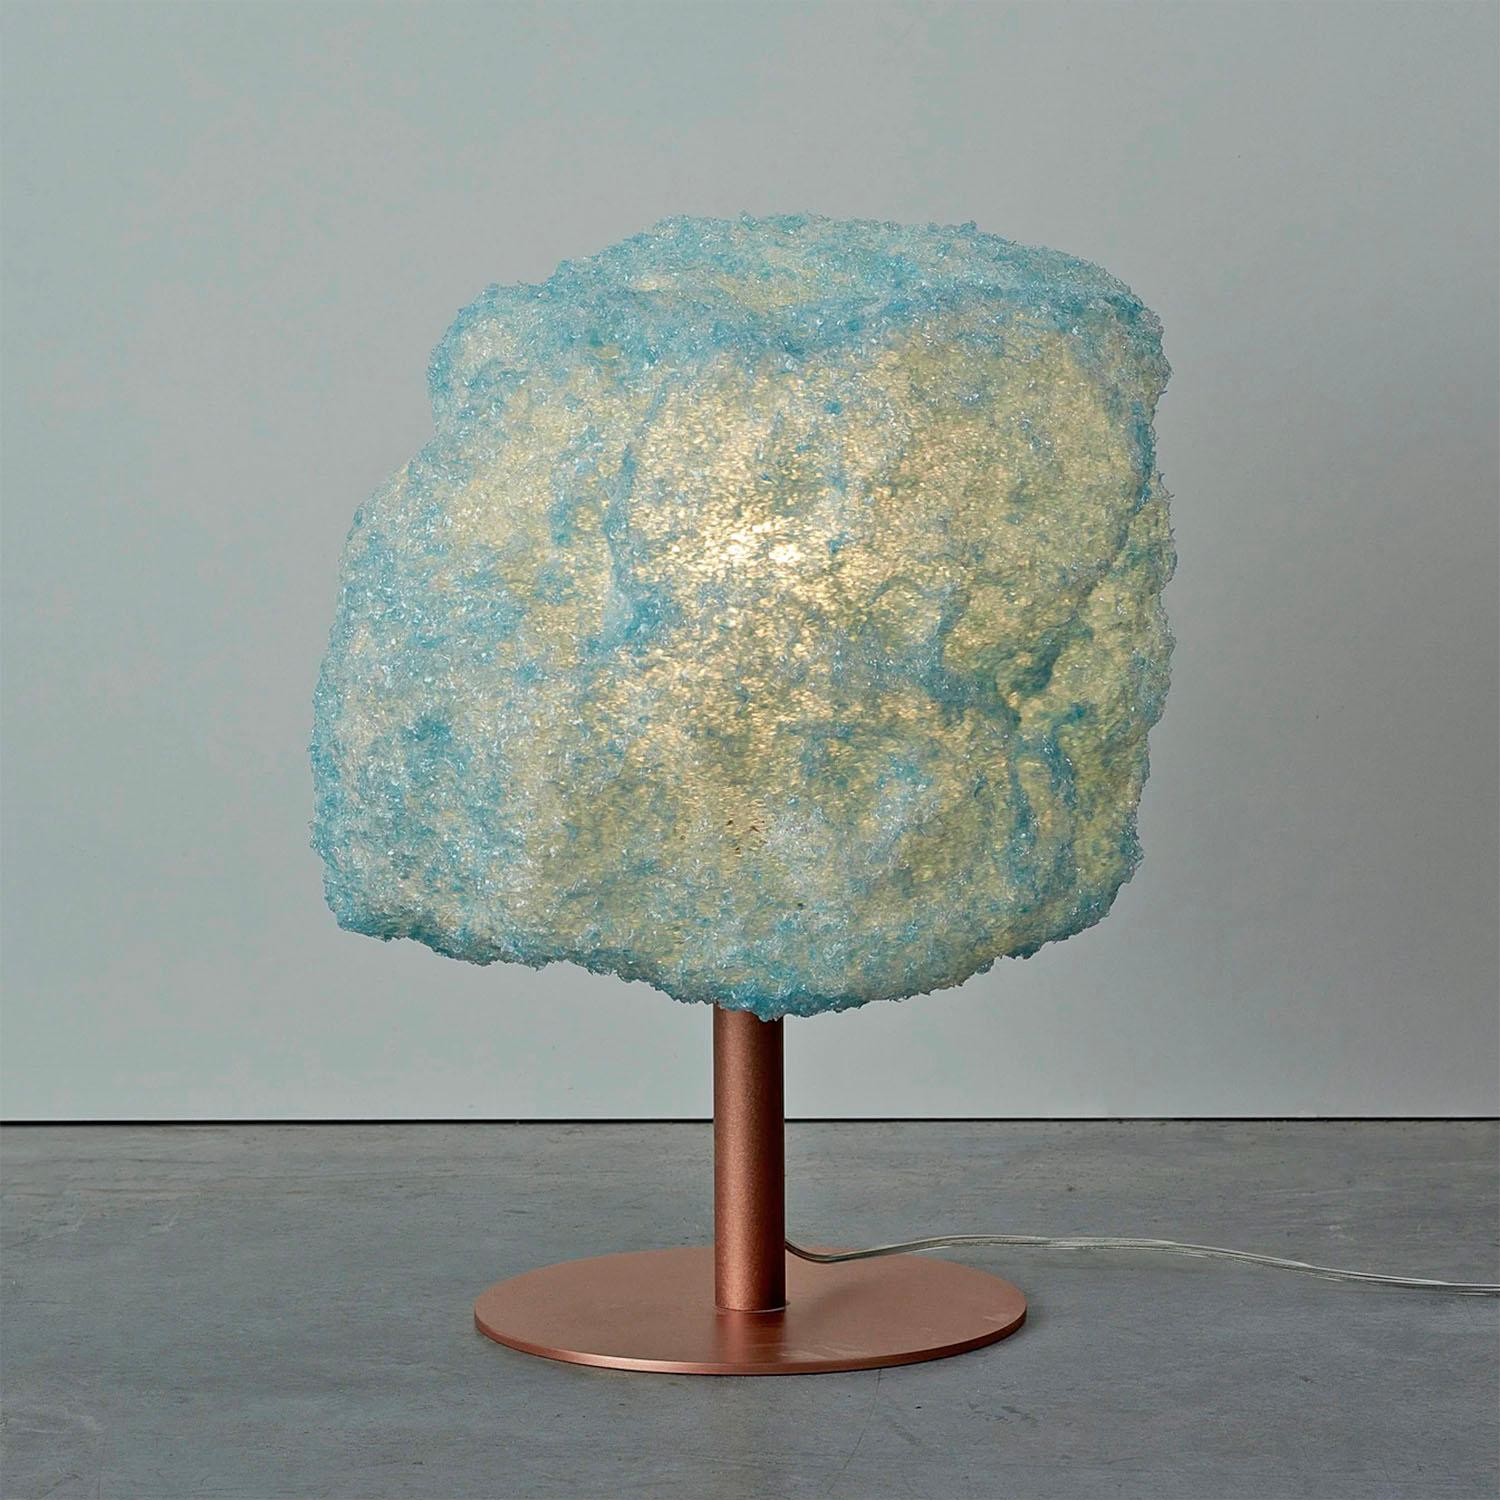 Contemporary blue table lamp - storm light copper by Johannes Hemann
Material: polycarbonate, copper
Dimensions: Ø 38 x H 45 cm
Material options: white, grey, blue

The Storm Series is by its concept the purest example of a process-design, where the